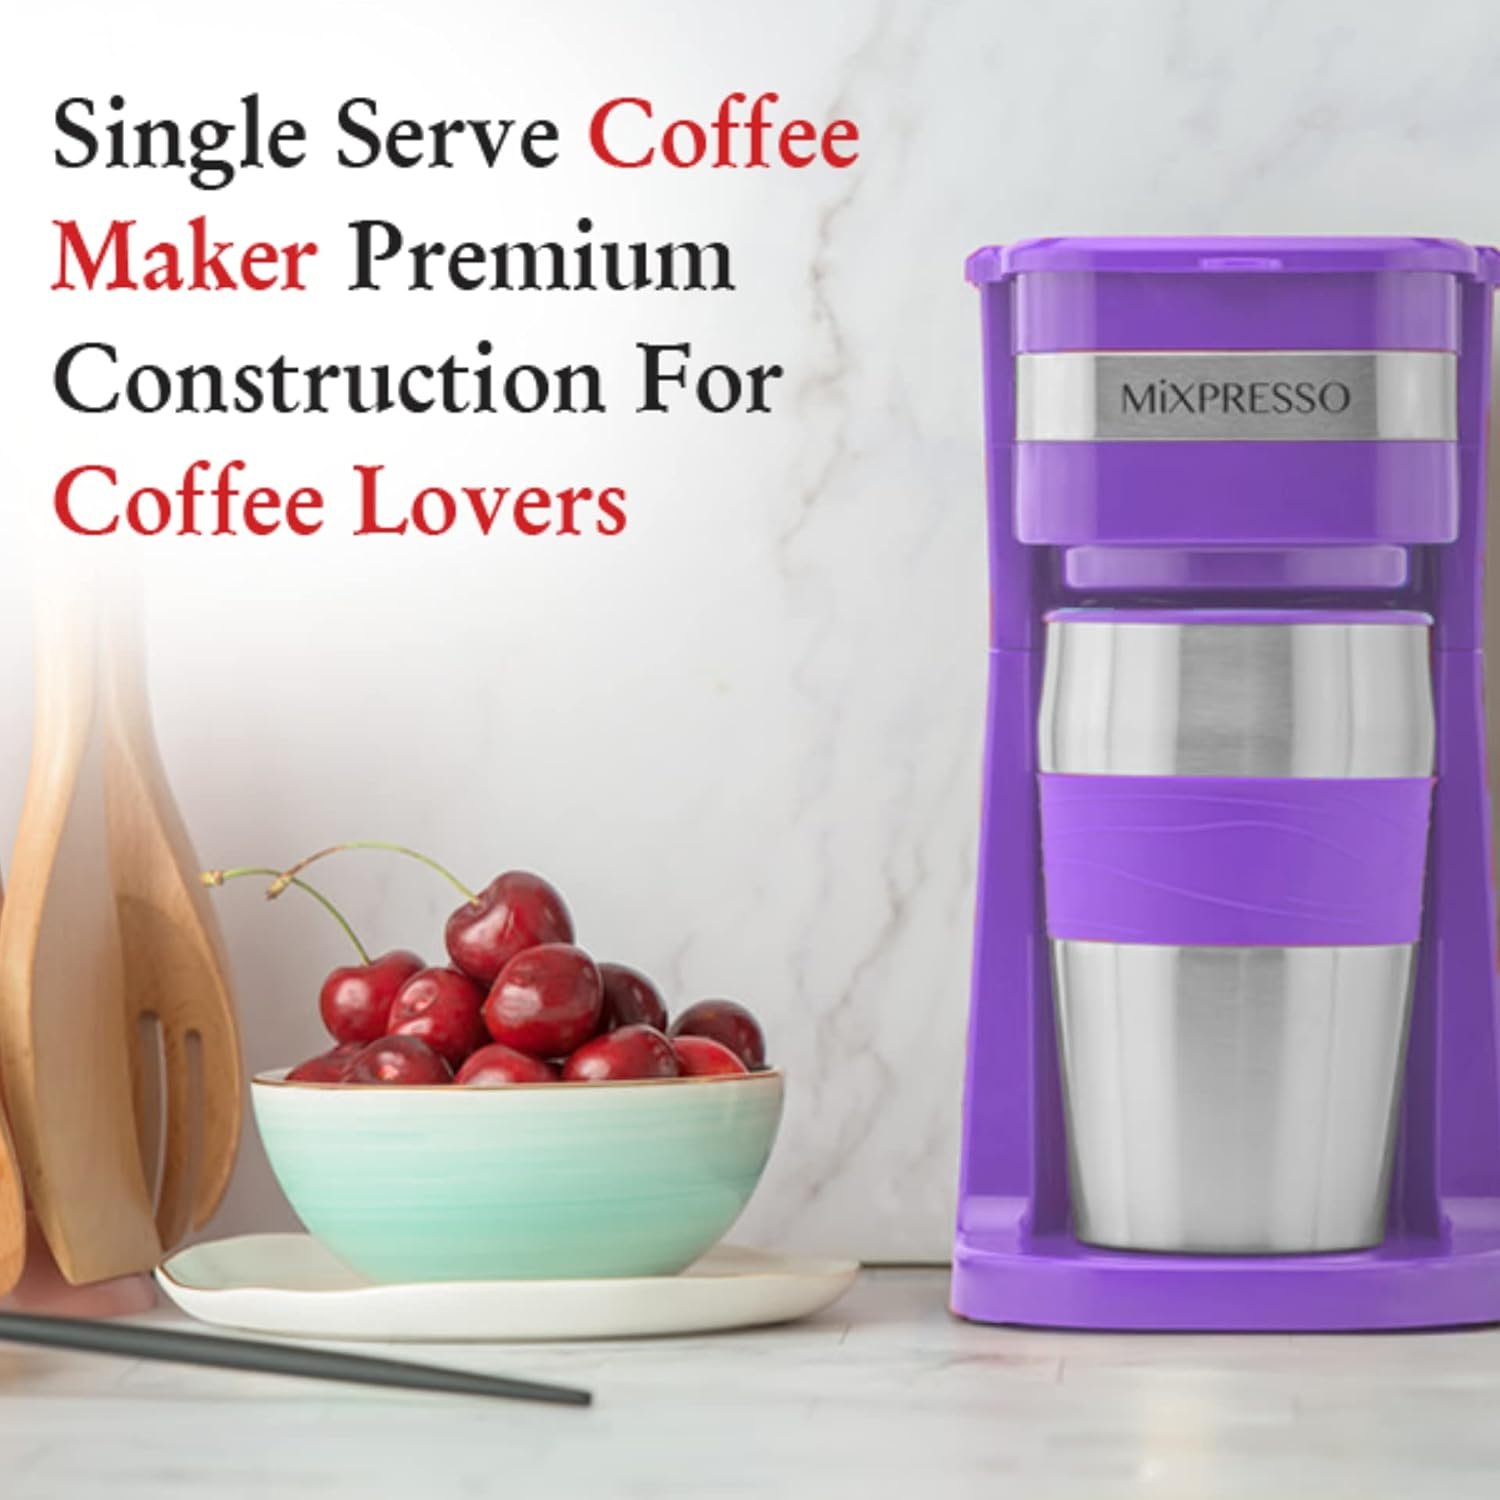 Mixpresso 2-In-1 Single Cup Coffee Maker 14oz Travel Mug, Portable Coffee Maker For Travel, Personal Drip Coffee Brewer Tumbler Advanced Auto Shut Off Function Reusable Eco-Friendly Filter